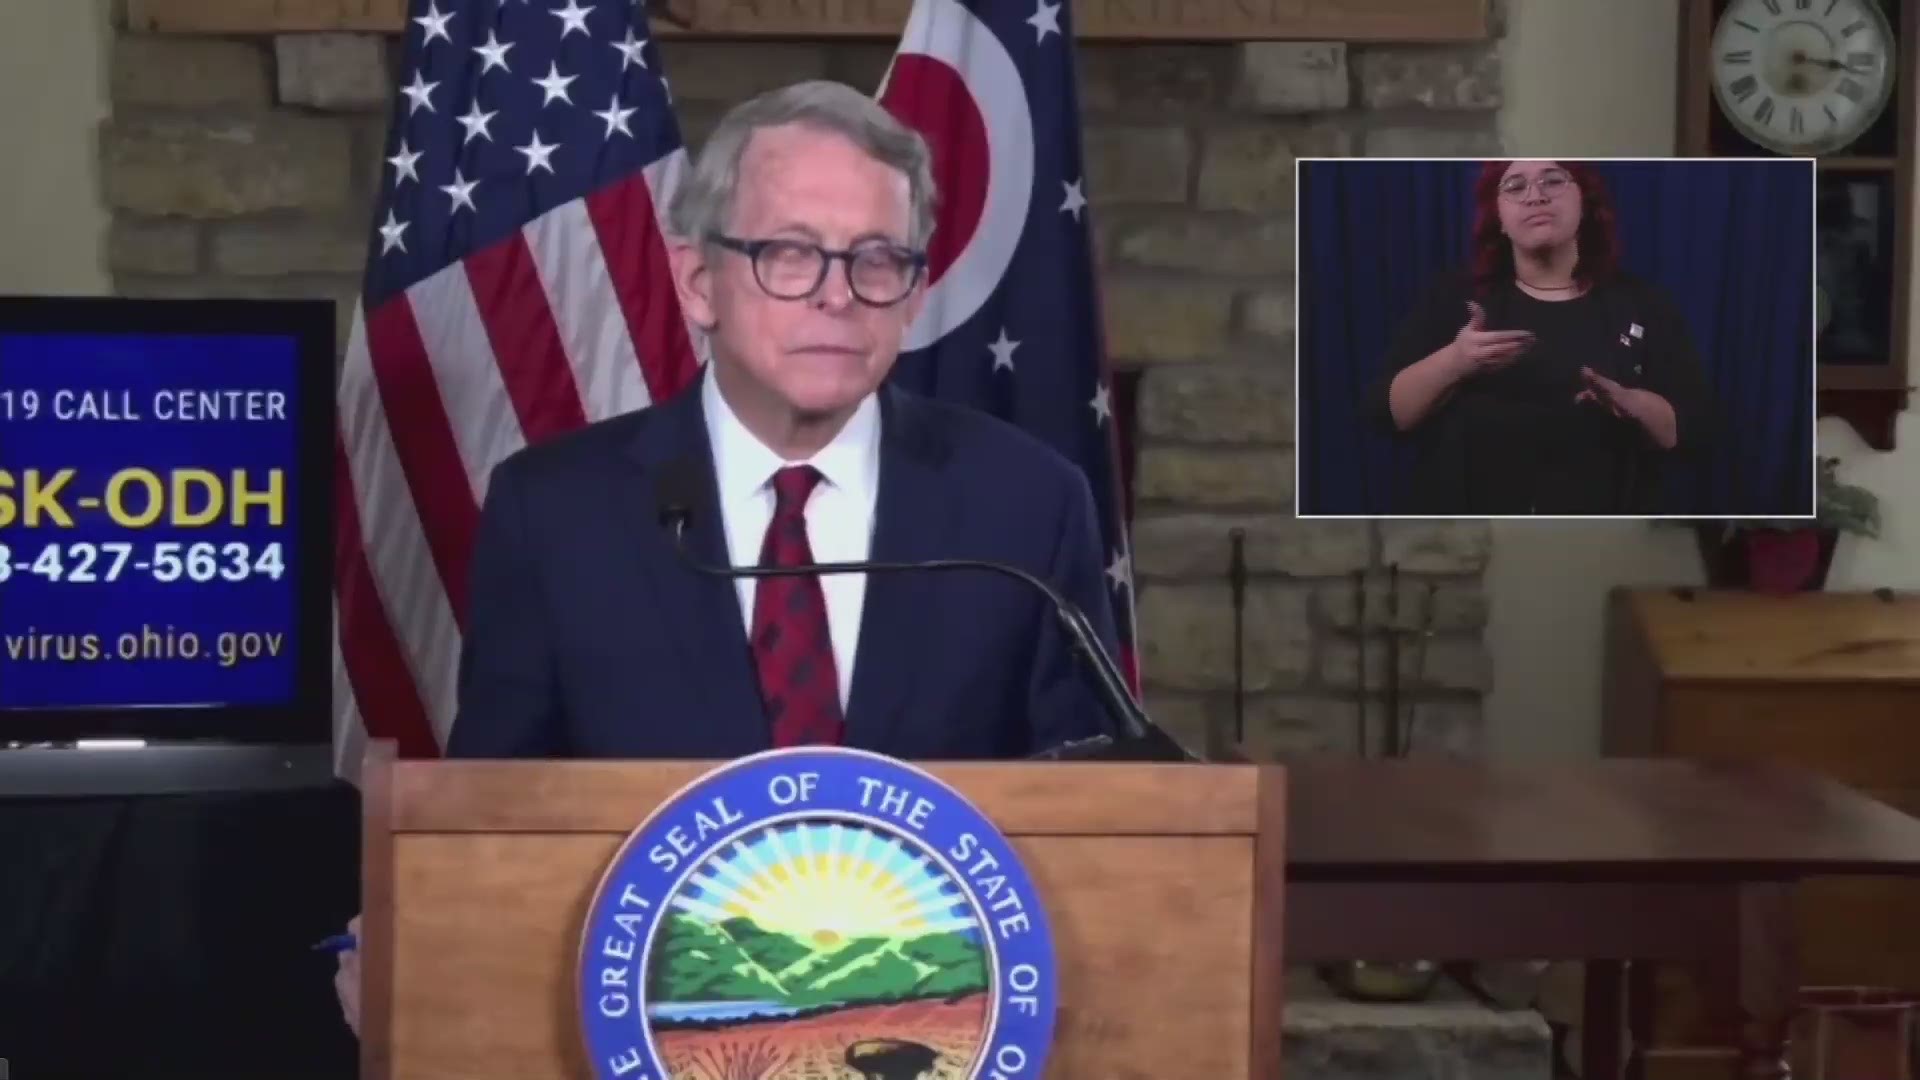 Ohio Governor Mike DeWine declined to comment on Dr. Amy Acton considering a run for U.S. Senate in Ohio.